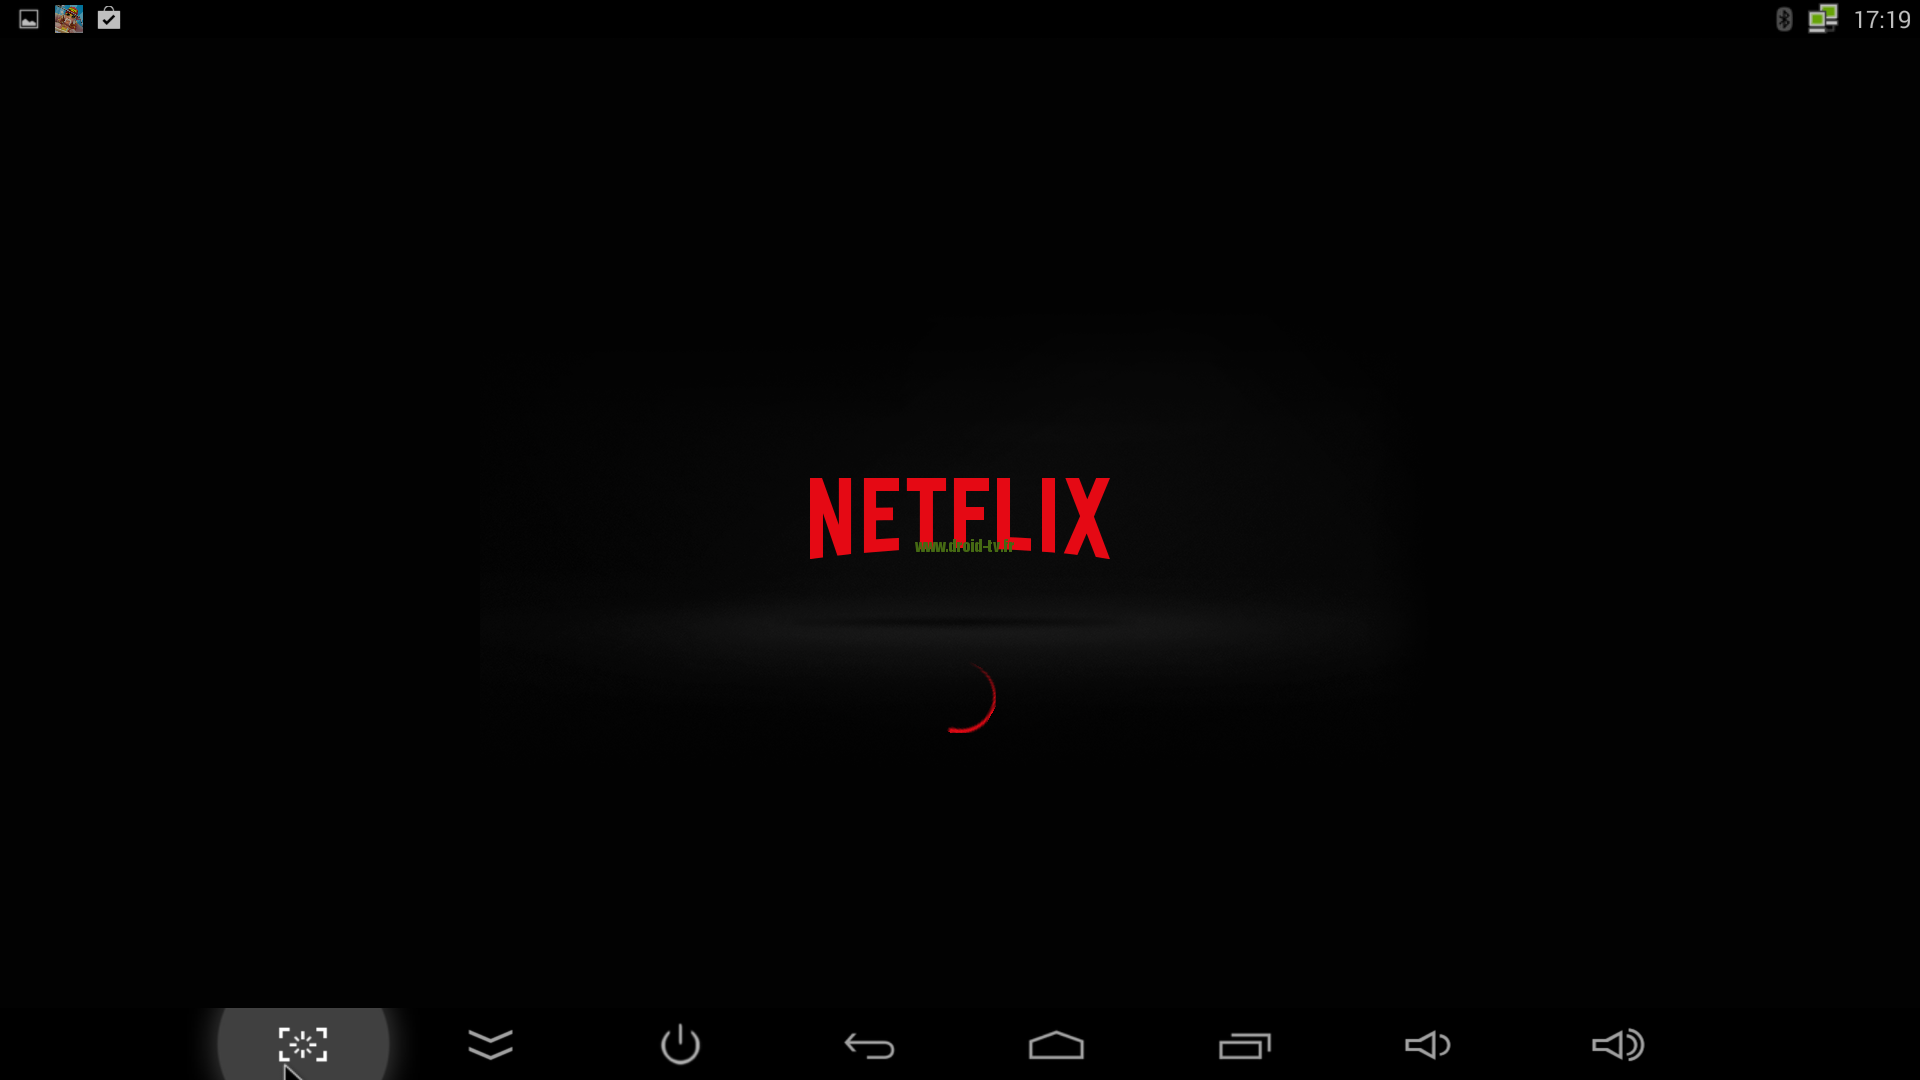 NetFlix box Android M8 Droid-TV.fr